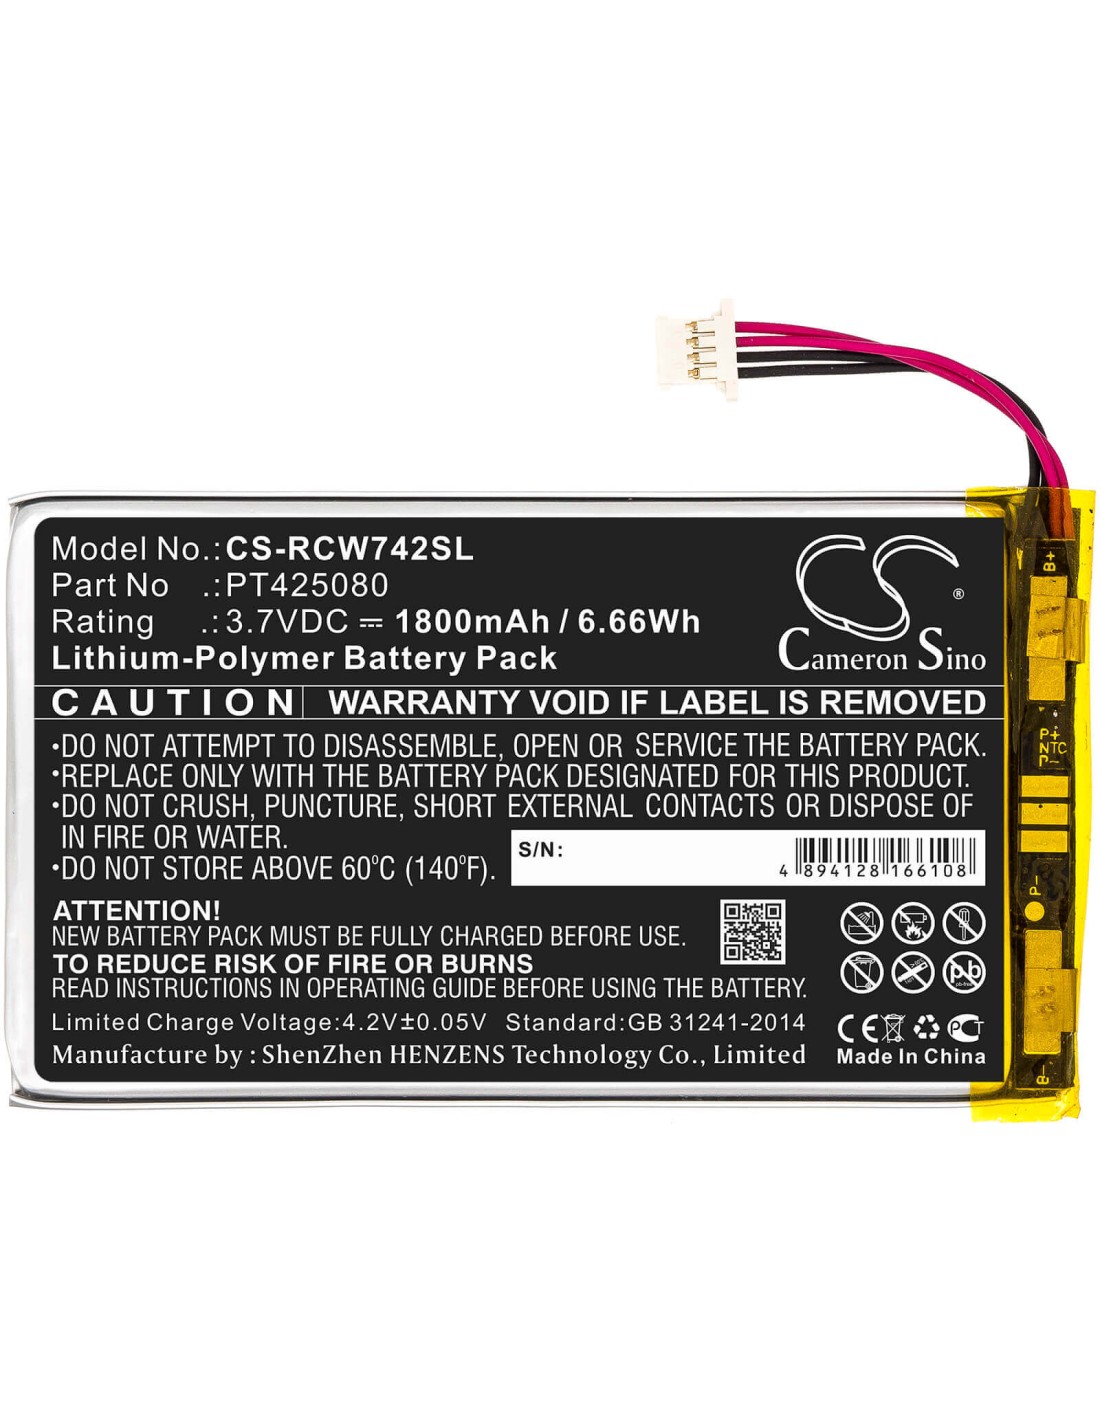 Battery for Rca, T6873w42, Voyager Ii 7" 3.7V, 1800mAh - 6.66Wh